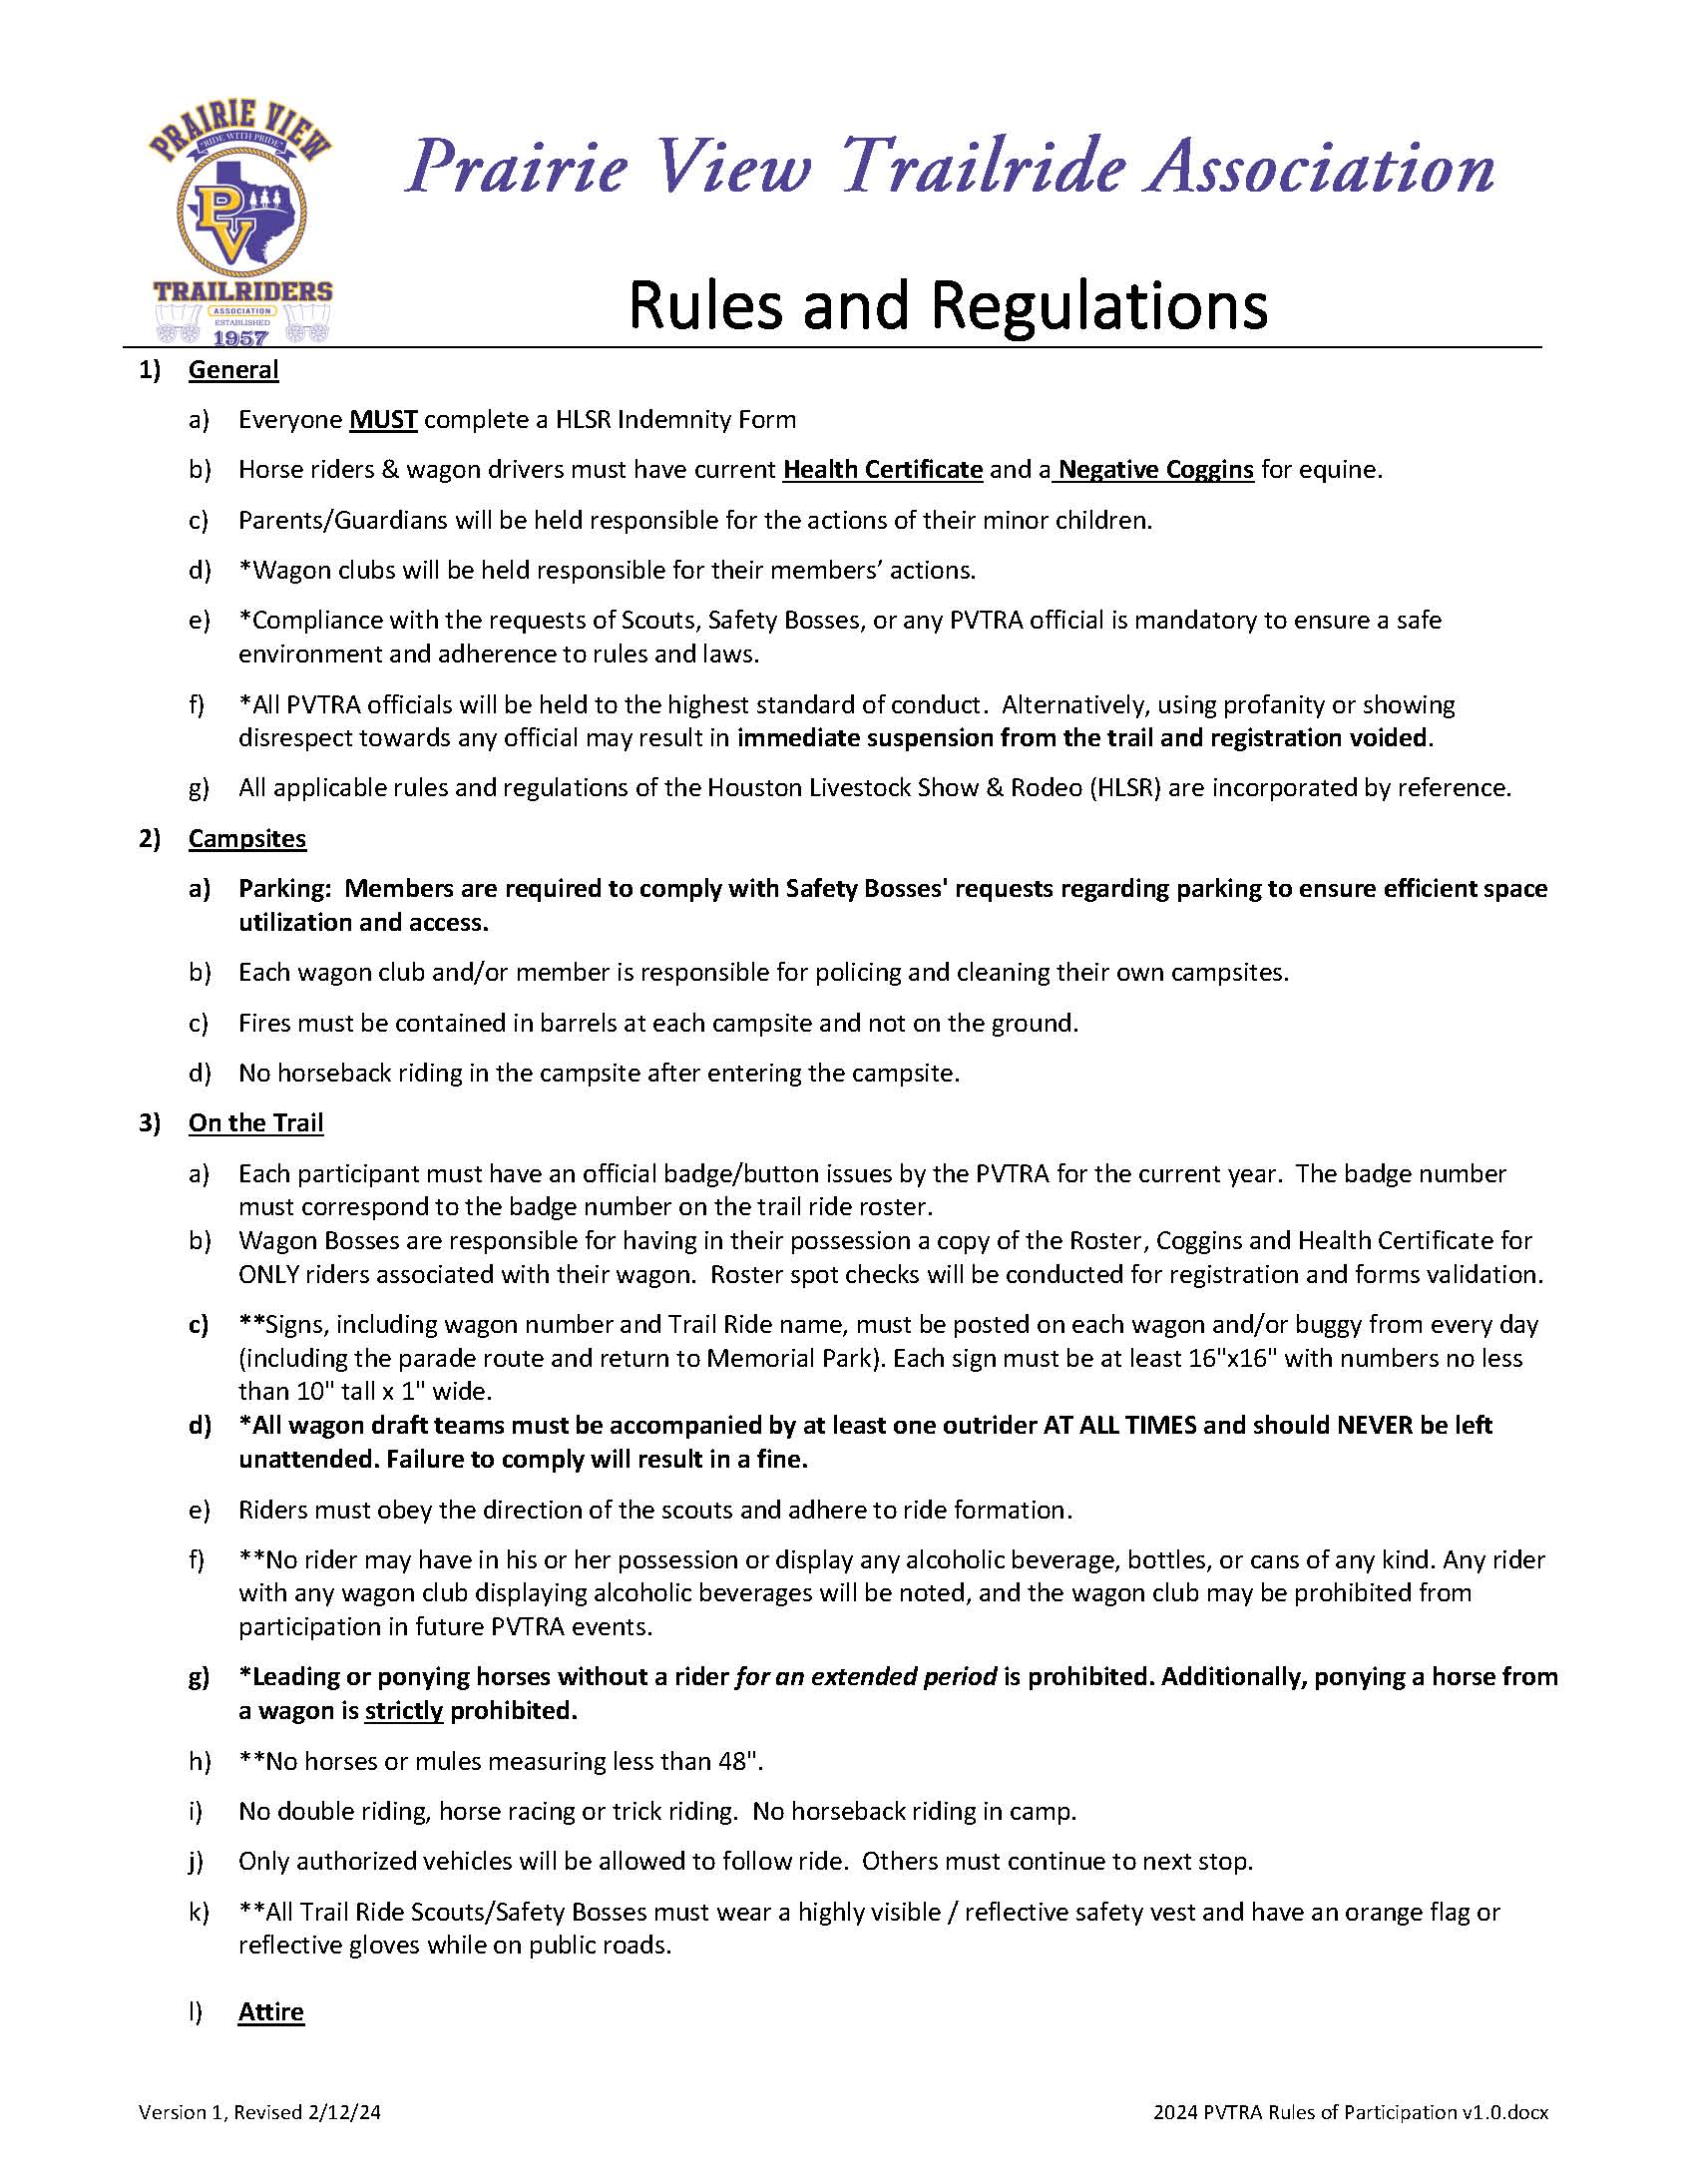 2024 PVTRA Rules of Participation Image